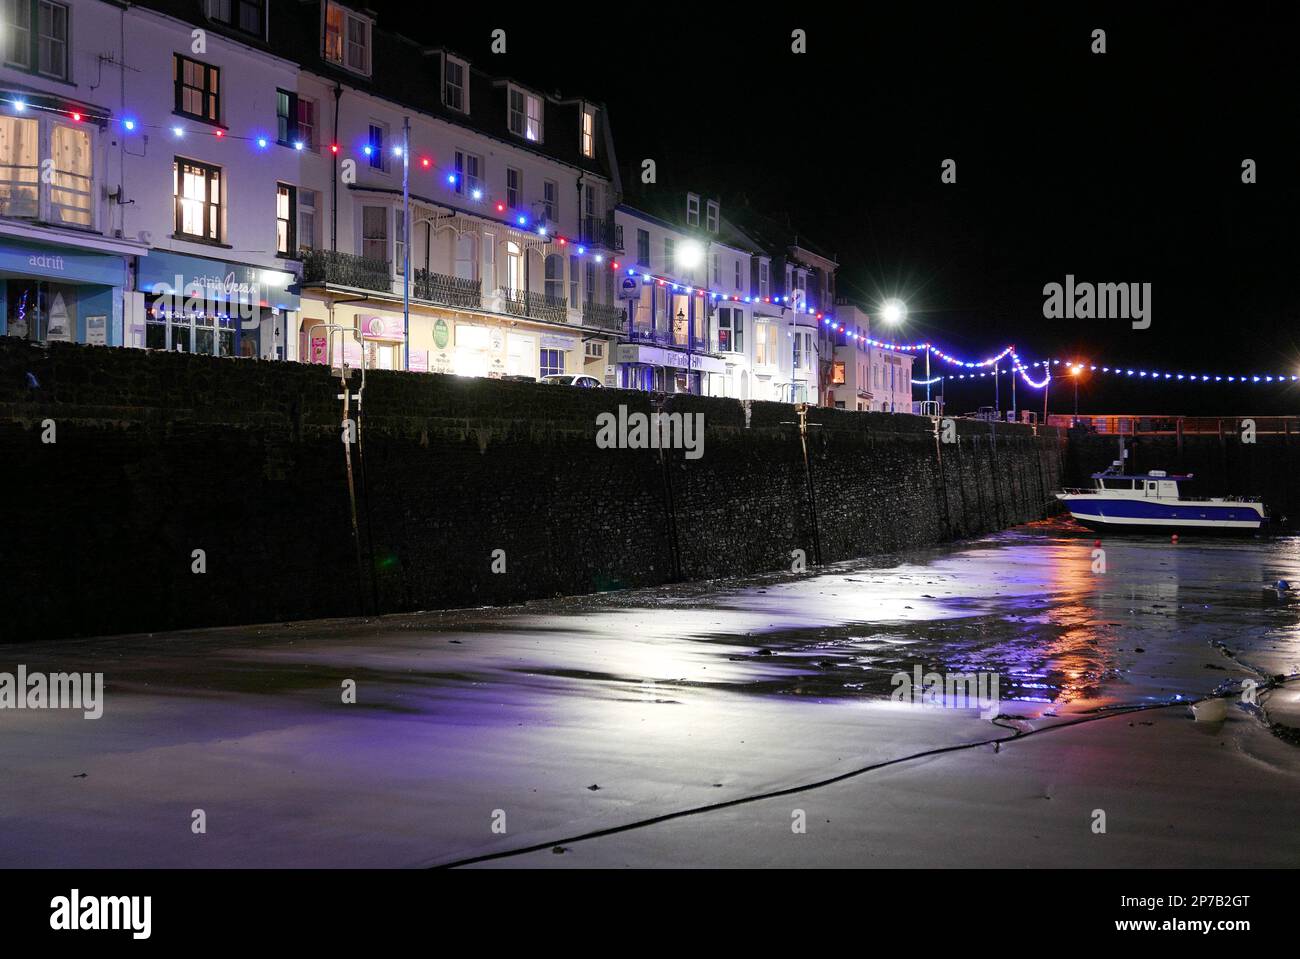 Harbour and houses lit up by street lights at night. Devon. England. UK Stock Photo